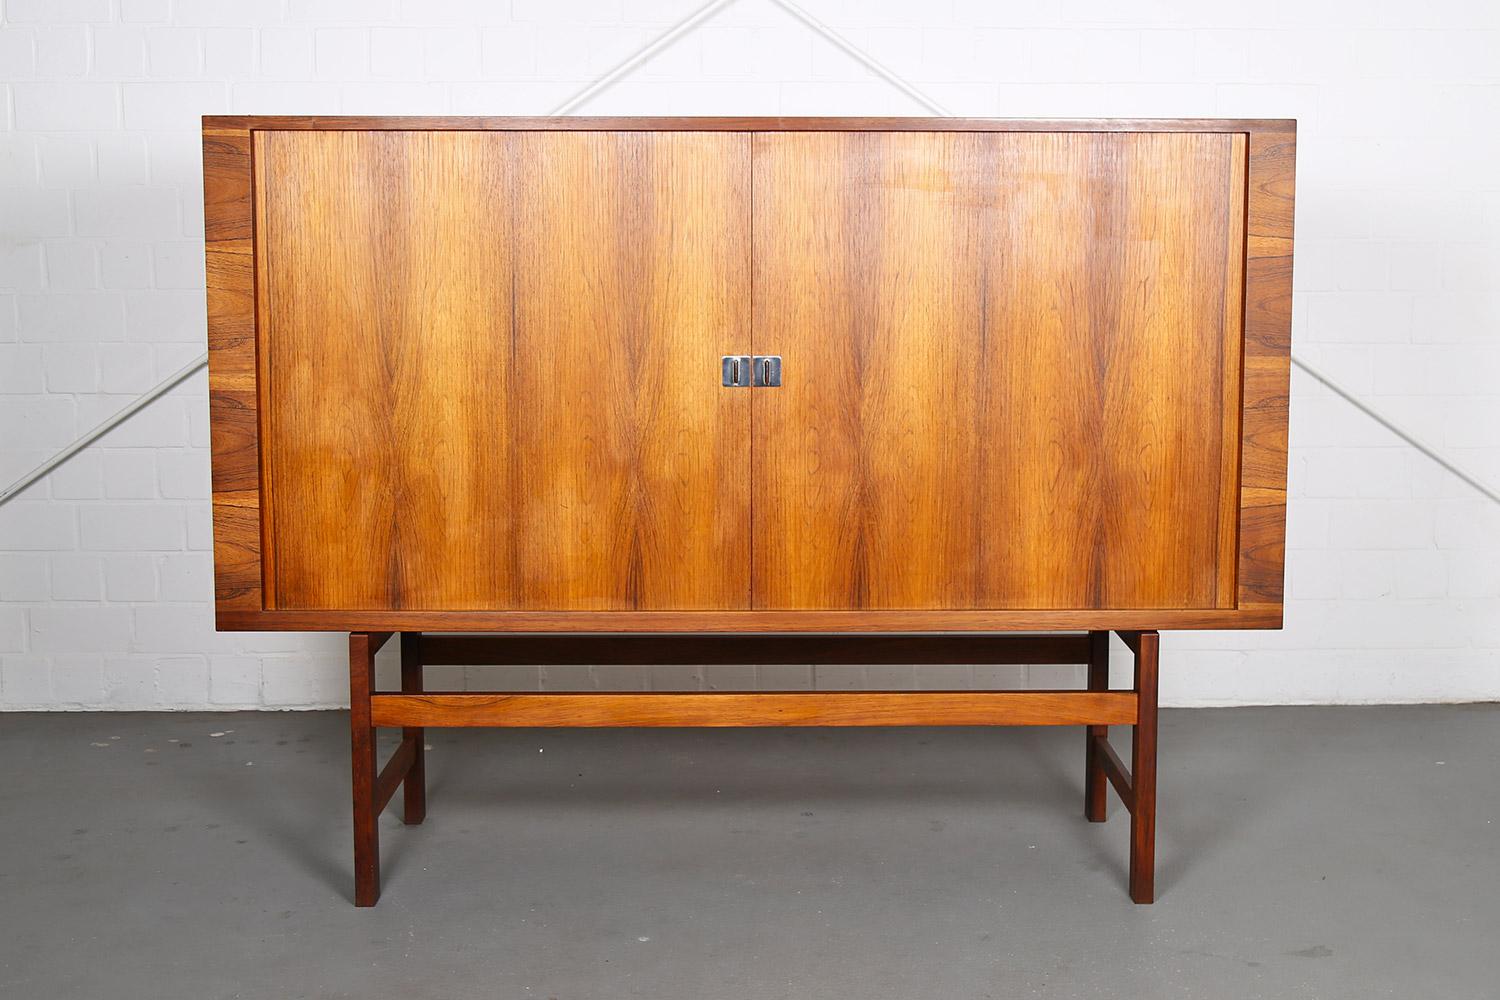 Rare Highboard designed by Hans J. Wegner model “RY-45” for Ry Møbler in the 60s. Also known as the “President Credenza”. Danish Design Sideboard in beautiful rosewood version with wooden legs.